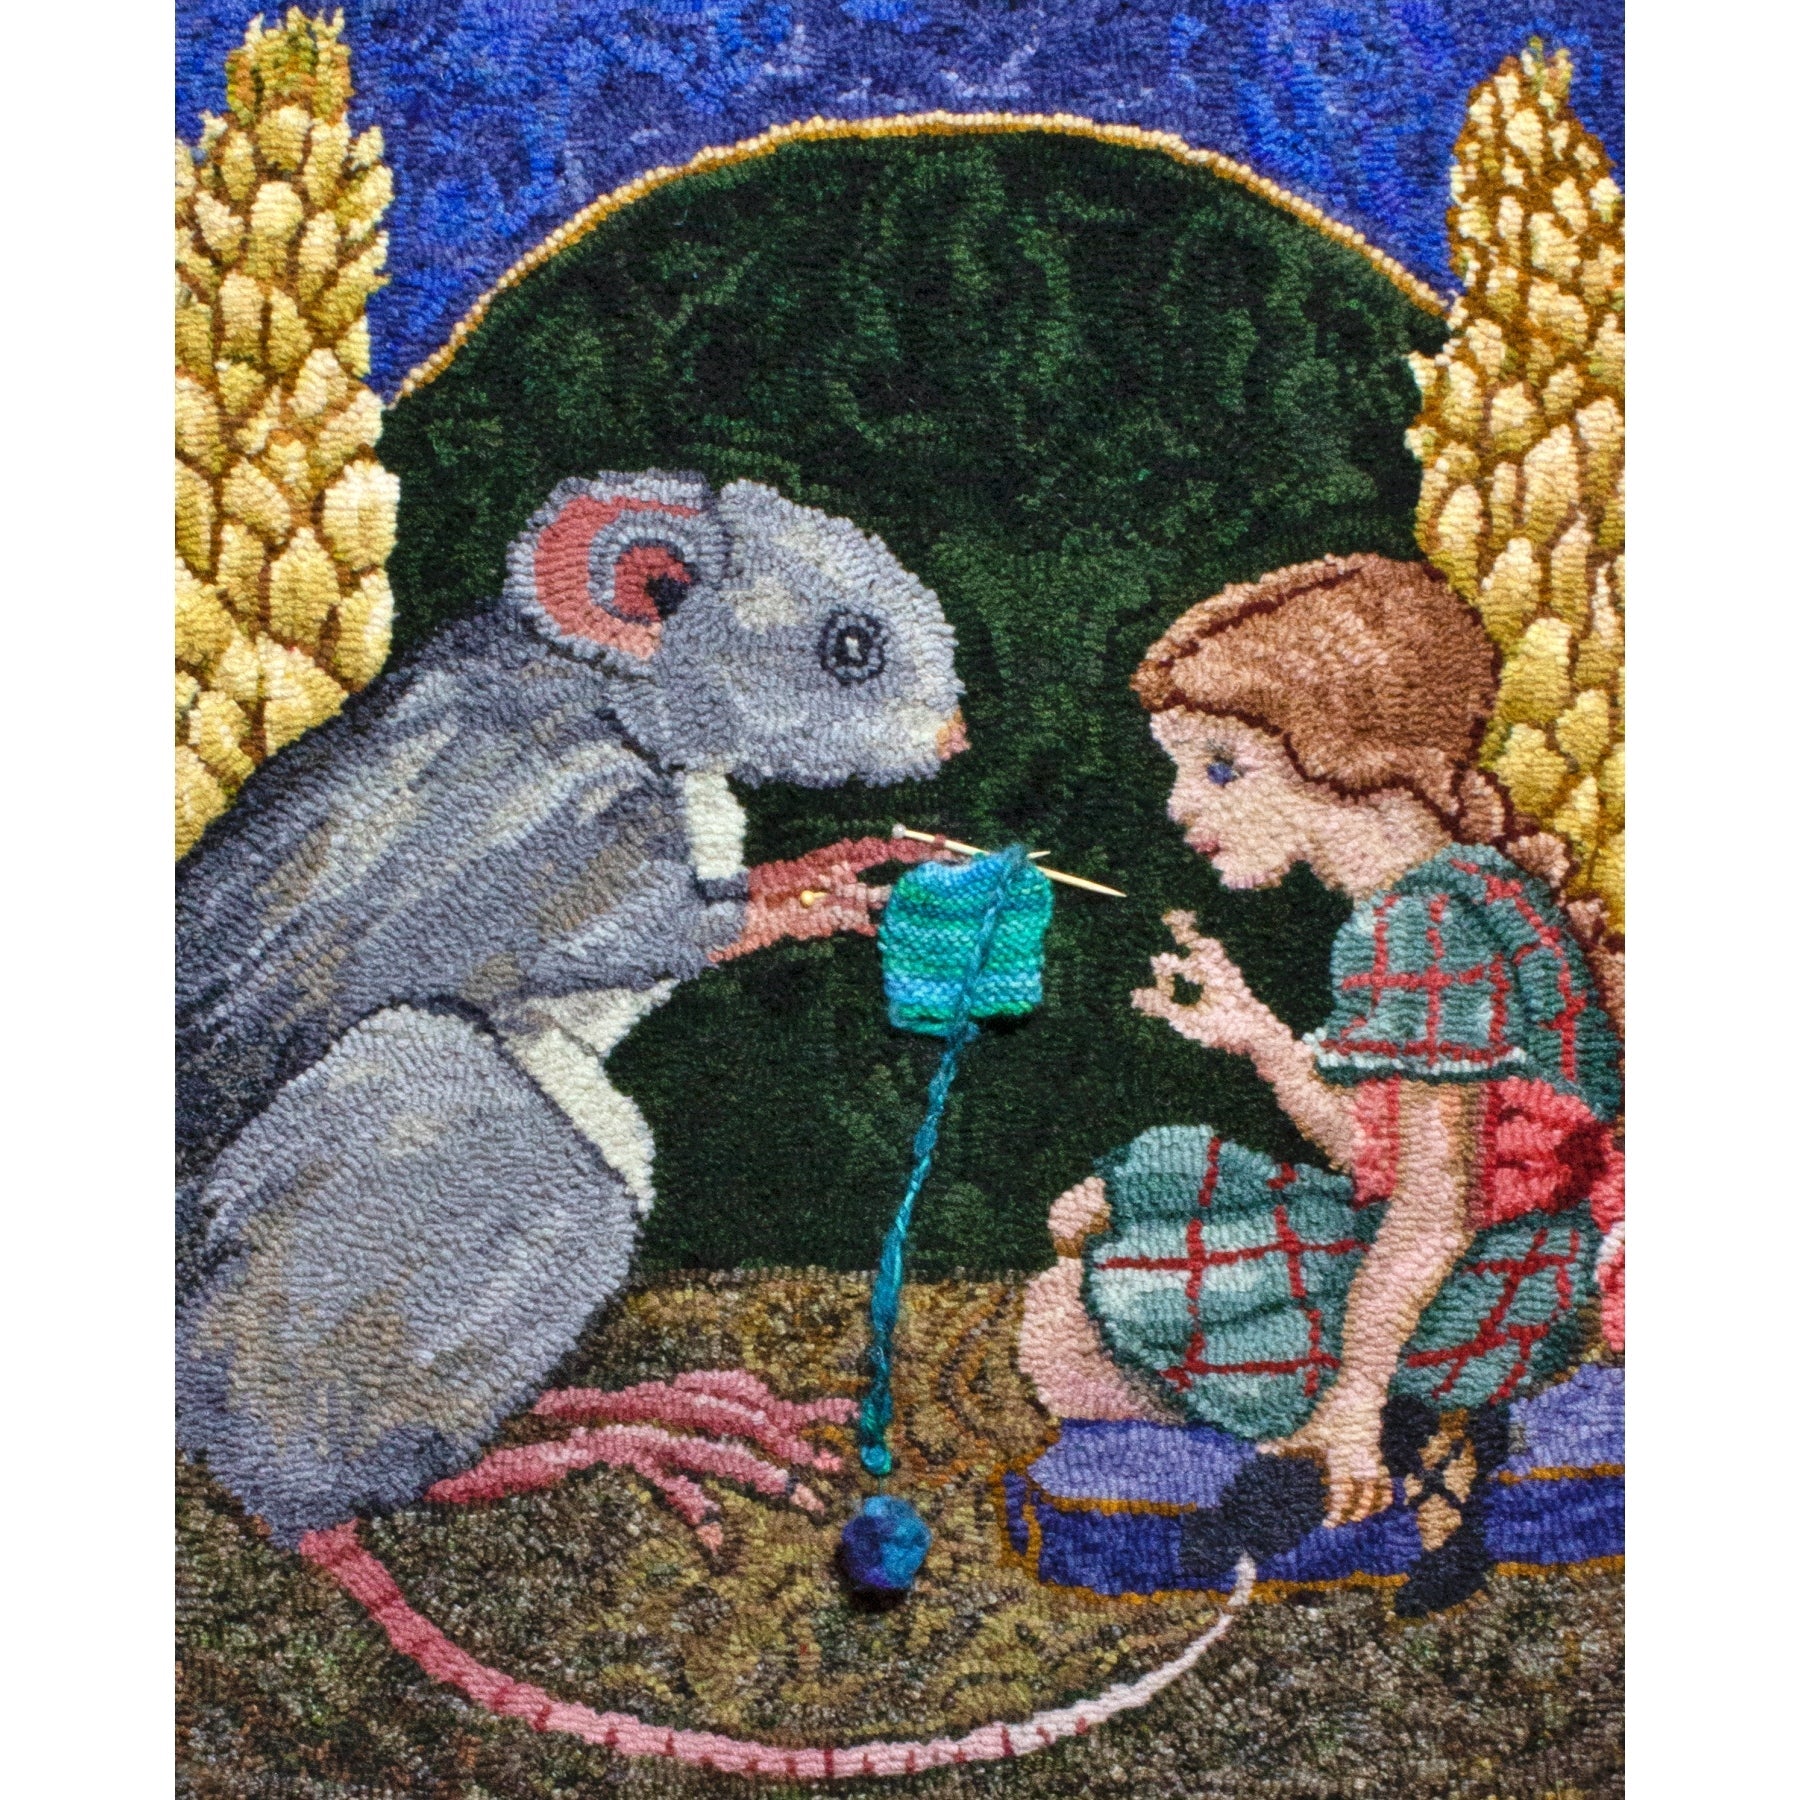 Thumbelina came to live with the Field mouse from Thumbelina, ill. Unkown, 1909, rug hooked by Sue Morin